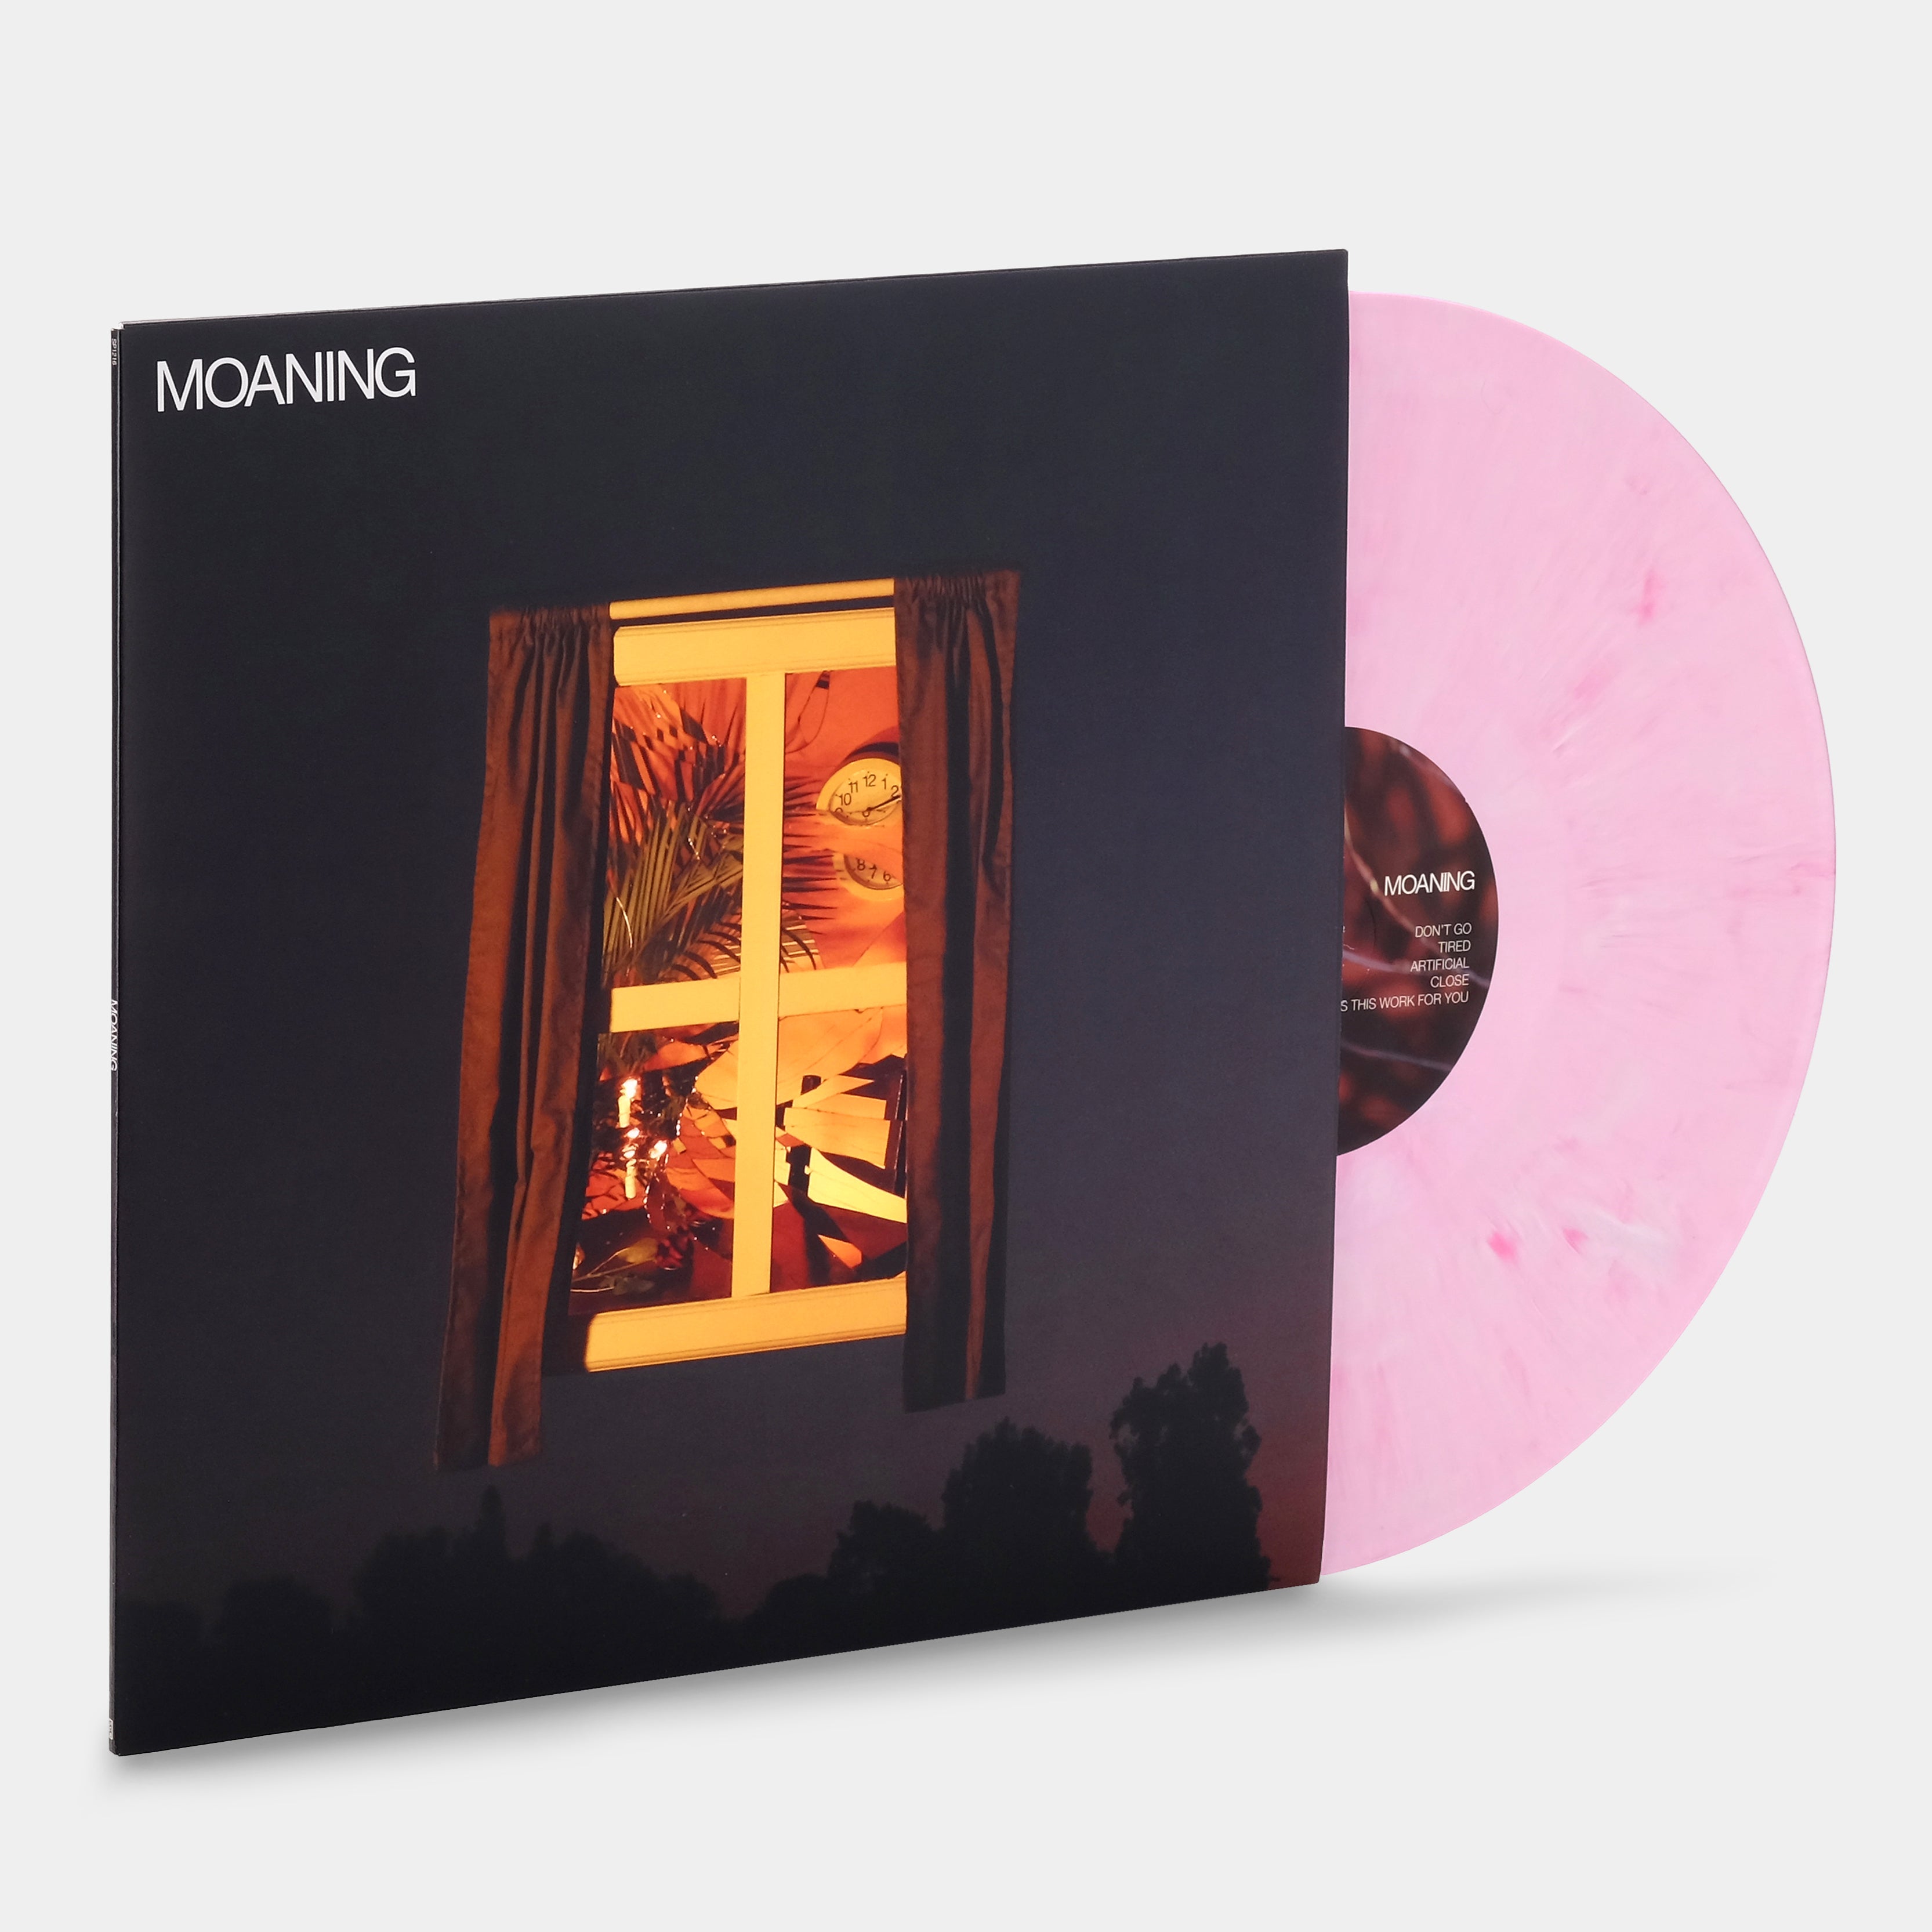 Moaning - Moaning LP Pink Vinyl Record